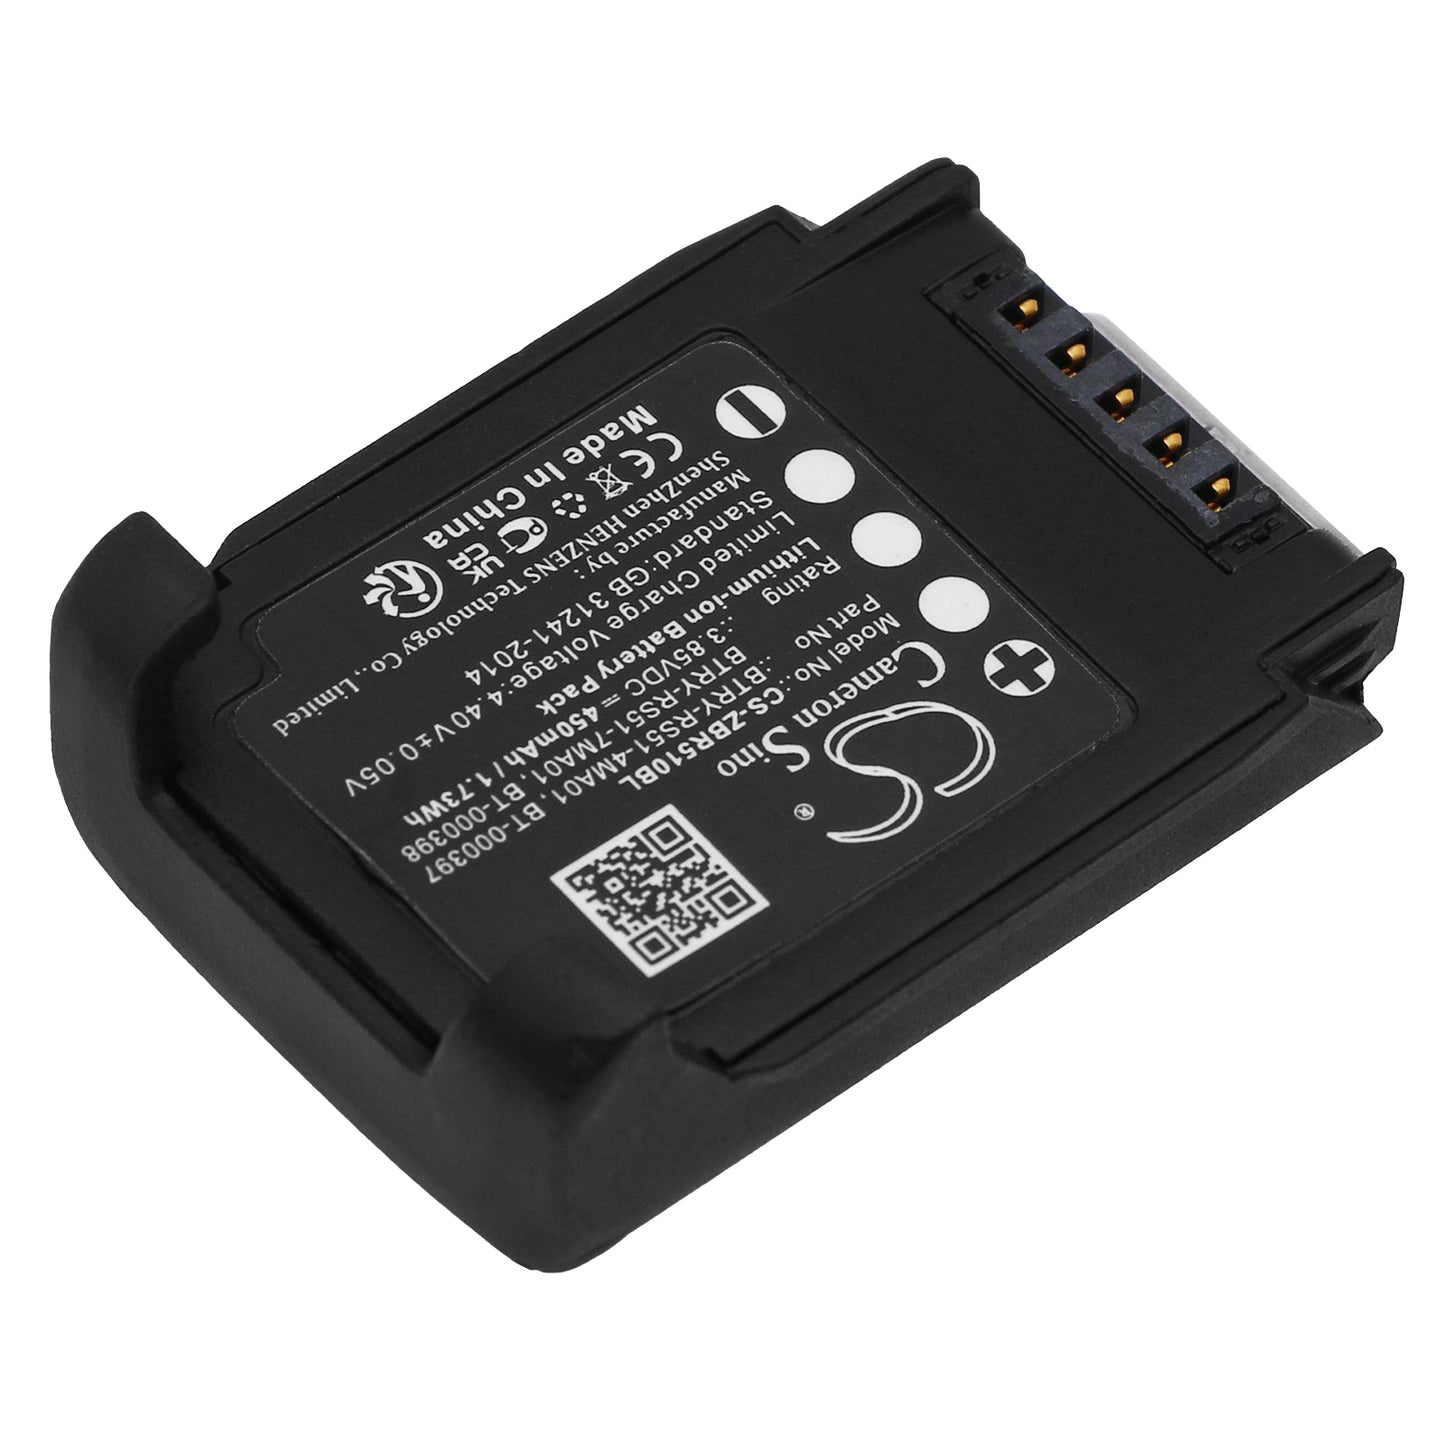 450mAh BTRY-RS51-4MA01, BTRY-RS51-7MA01, BT-000397 Battery for Zebra RS51, RS5100 Ring Scanner, RS5100 2D Bluetooth Ring Scanner